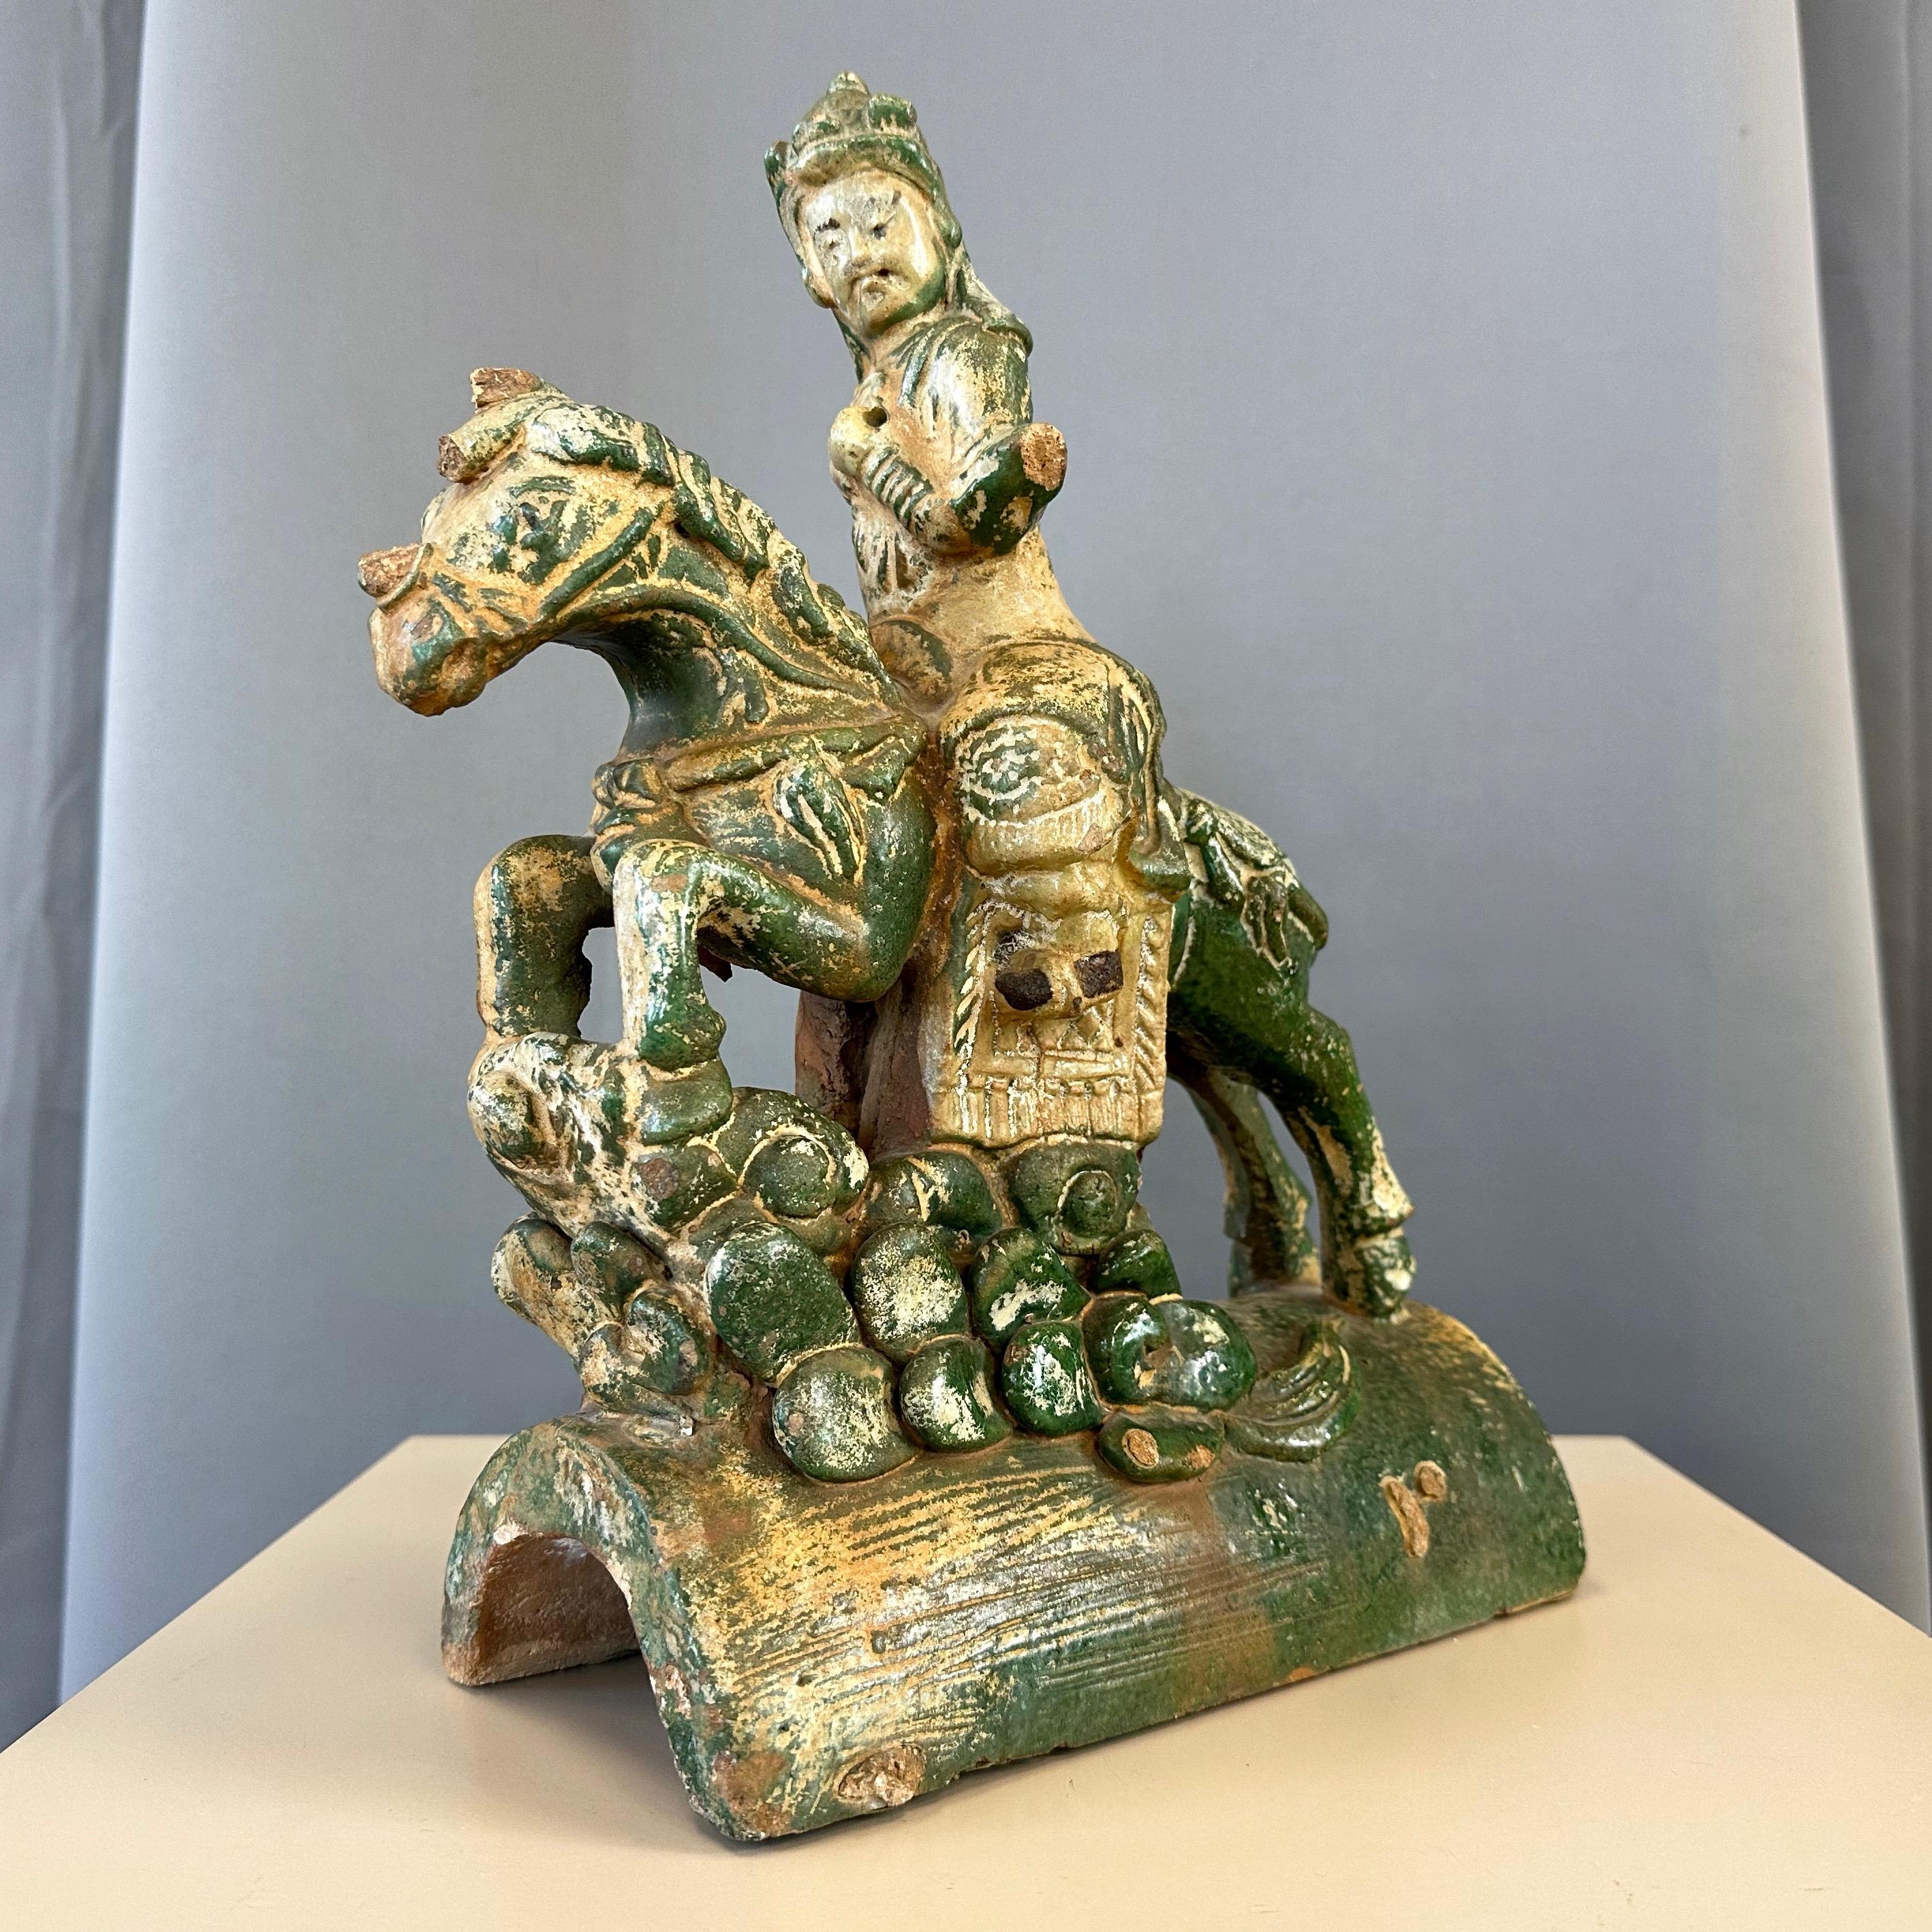 A circa 18th century Chinese Ming dynasty-style equestrian form glazed pottery roof tile.

Classic figural depiction of a proud celestial warrior on horseback, hand-crafted of earthenware or terracotta and finished in a sancai-style glaze with